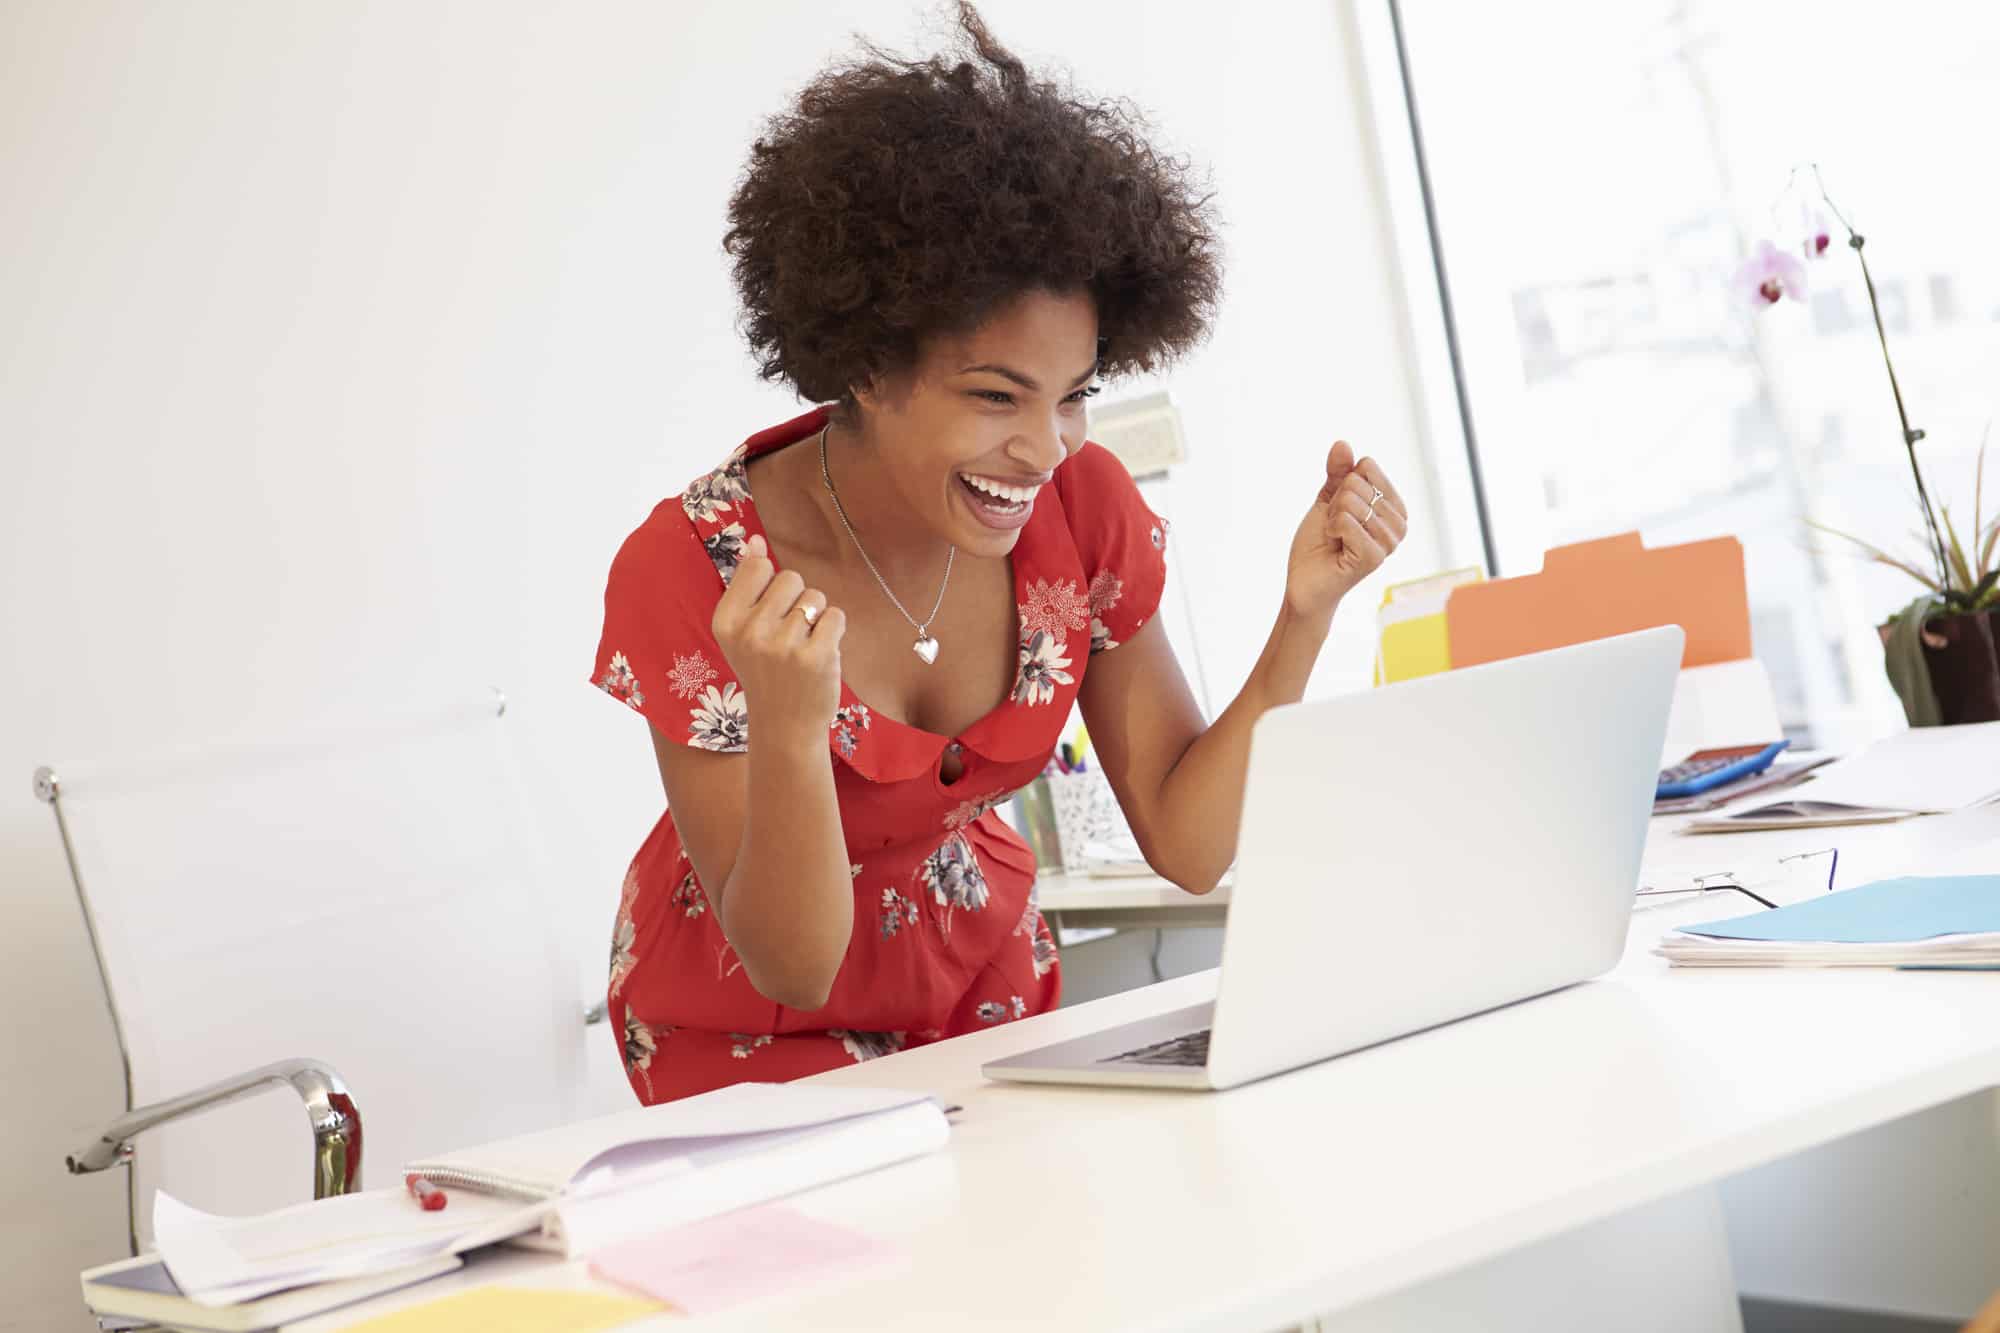 Photo shows a happy, excited woman standing behind her desk, looking at her laptop screen. This is the featured image for a blog post about free blogging tools to help make your posts shine.